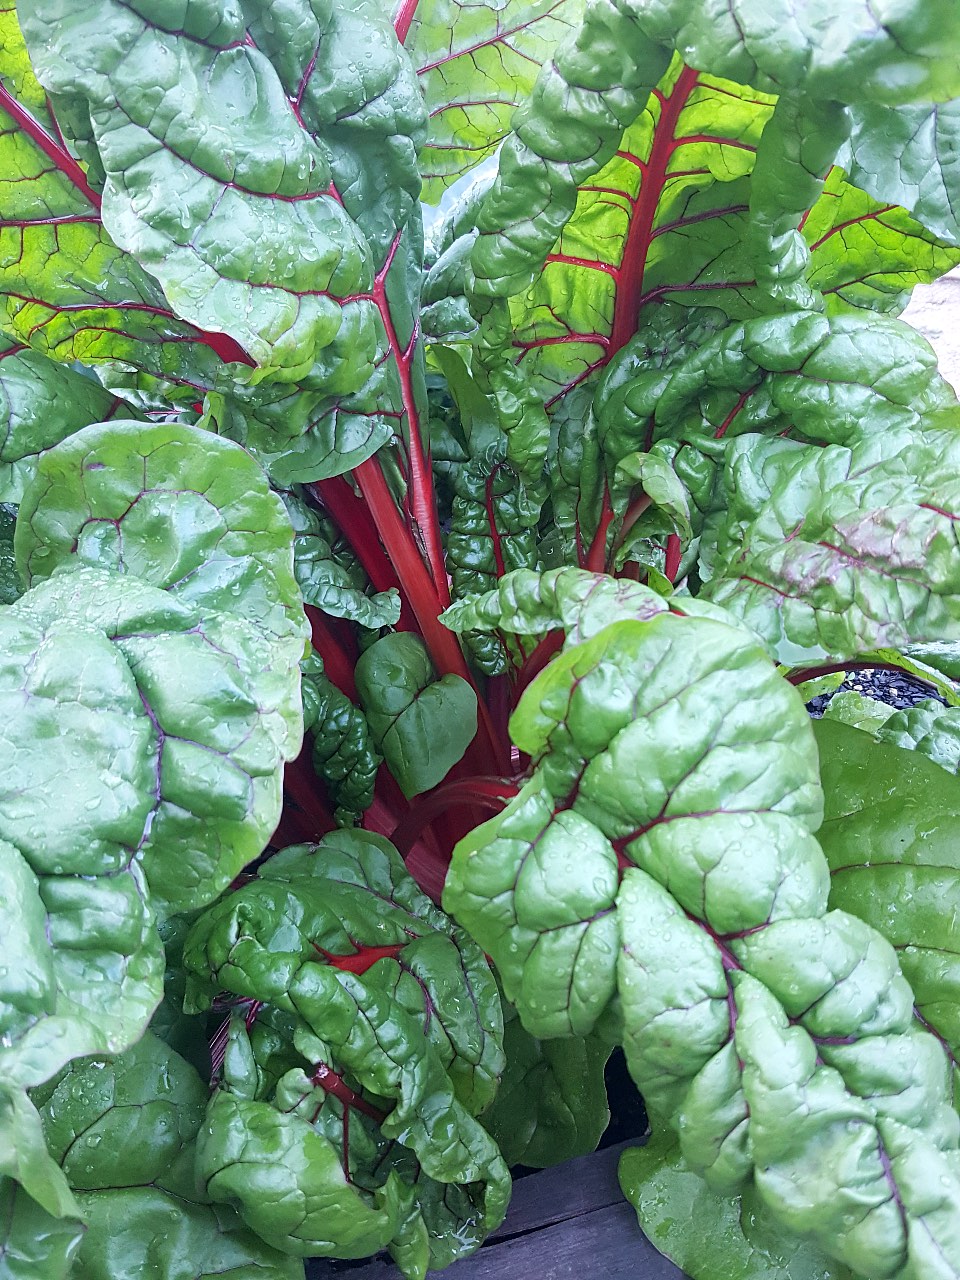 Red chard